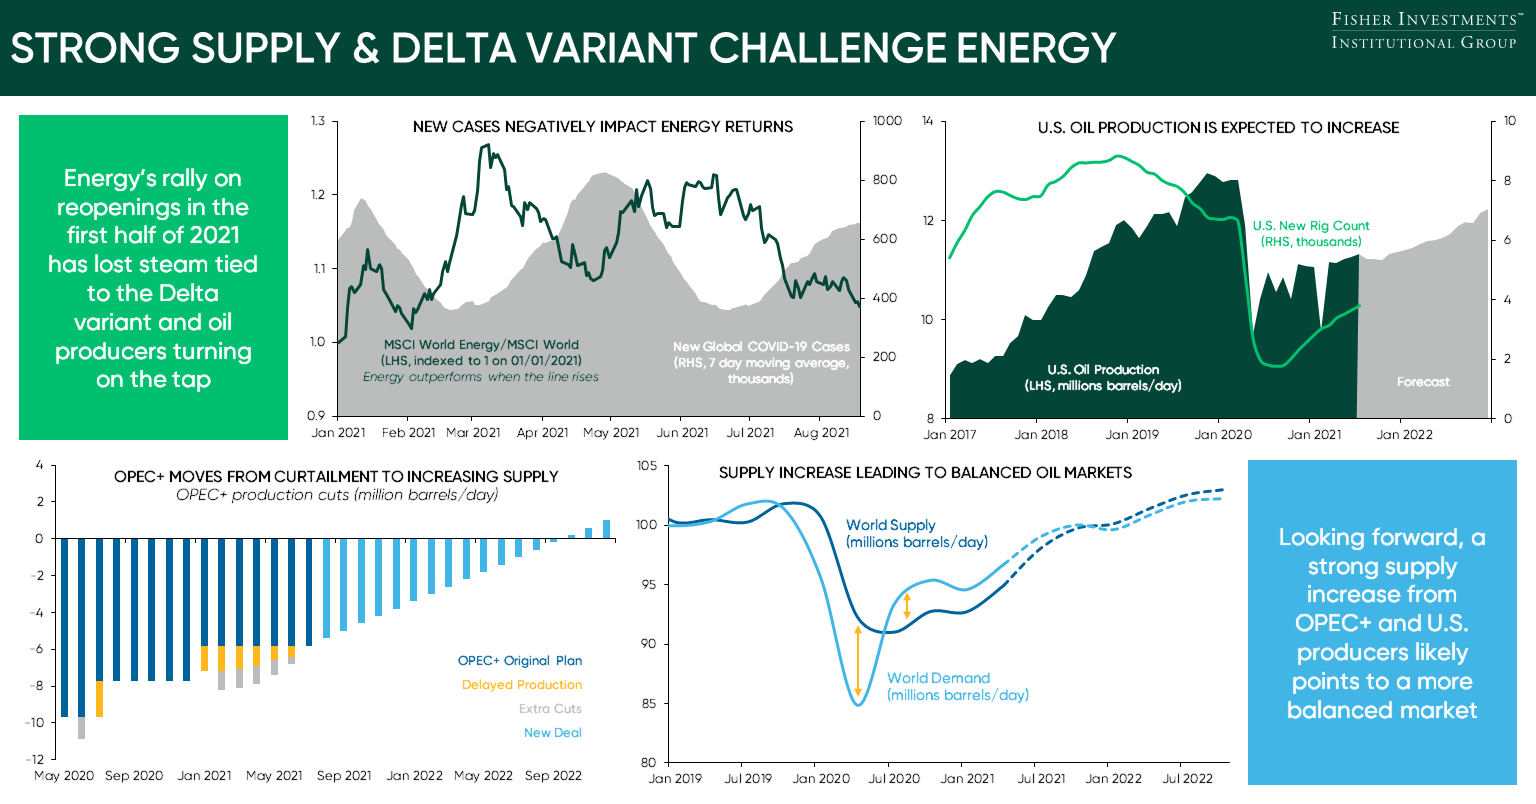 Graphs detaling the relationship between energy sector performance and the delta variant